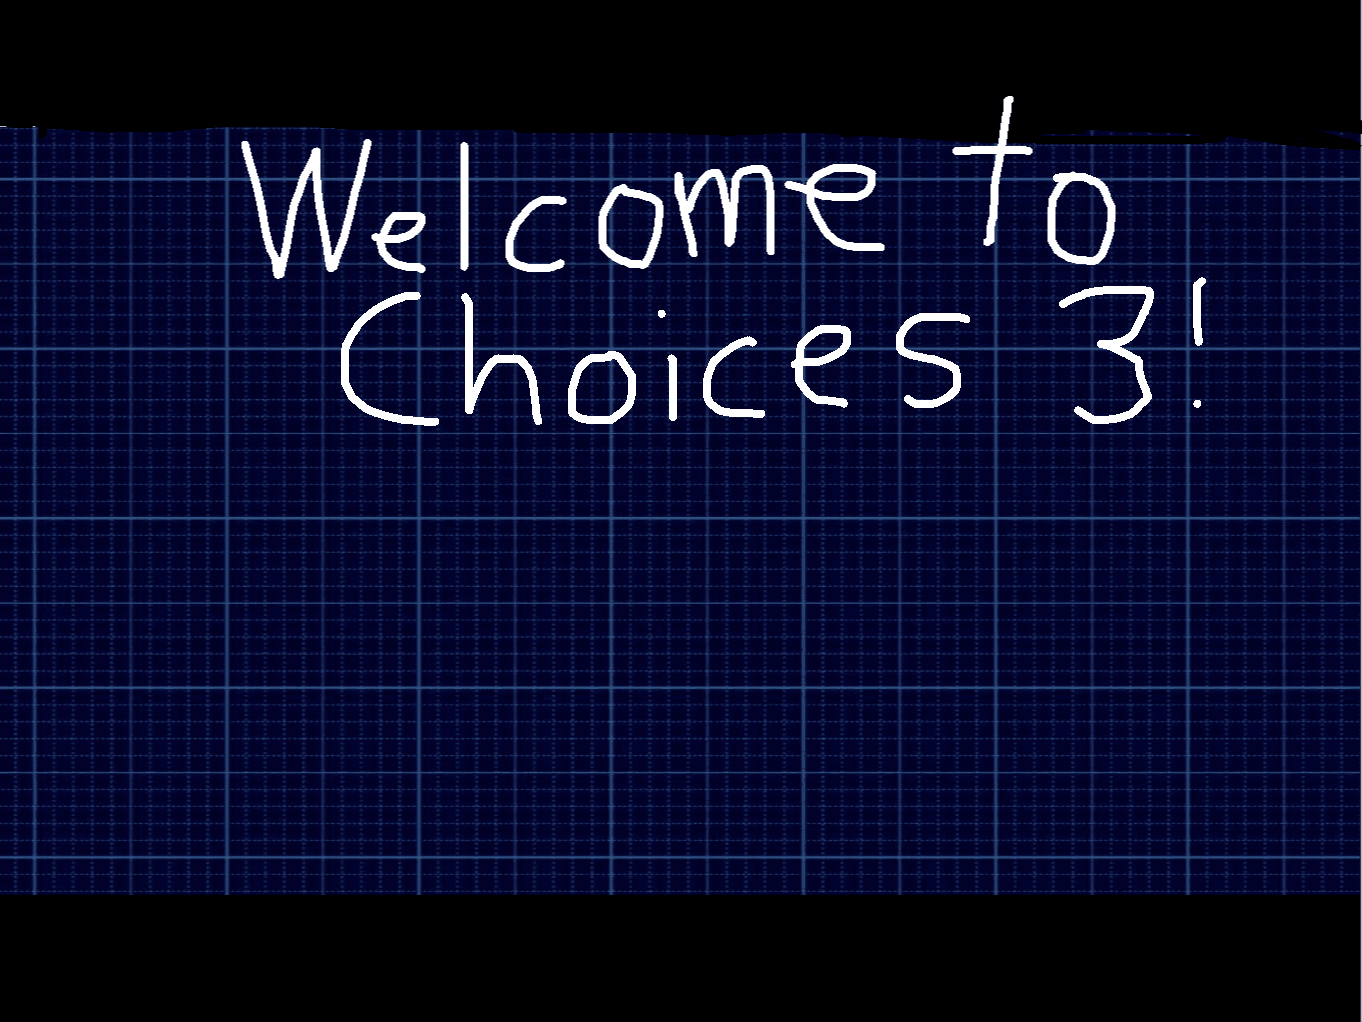 Choices 3, the real one